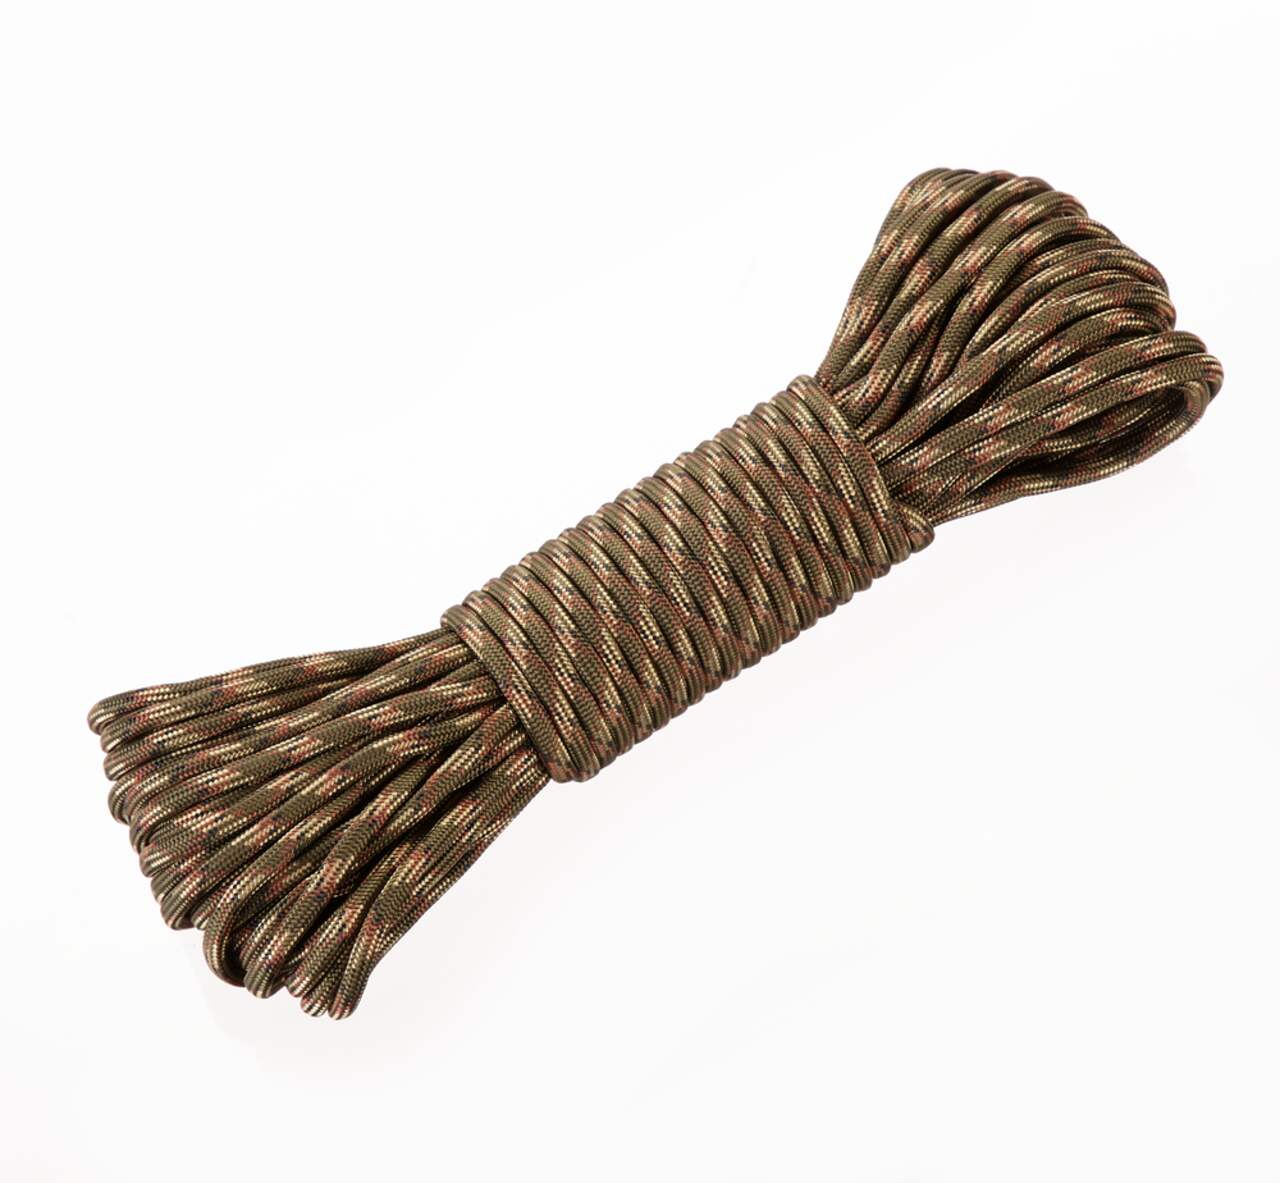 Rope Tactical Paracord Nylon bulk lot mixed use outdoor indoor